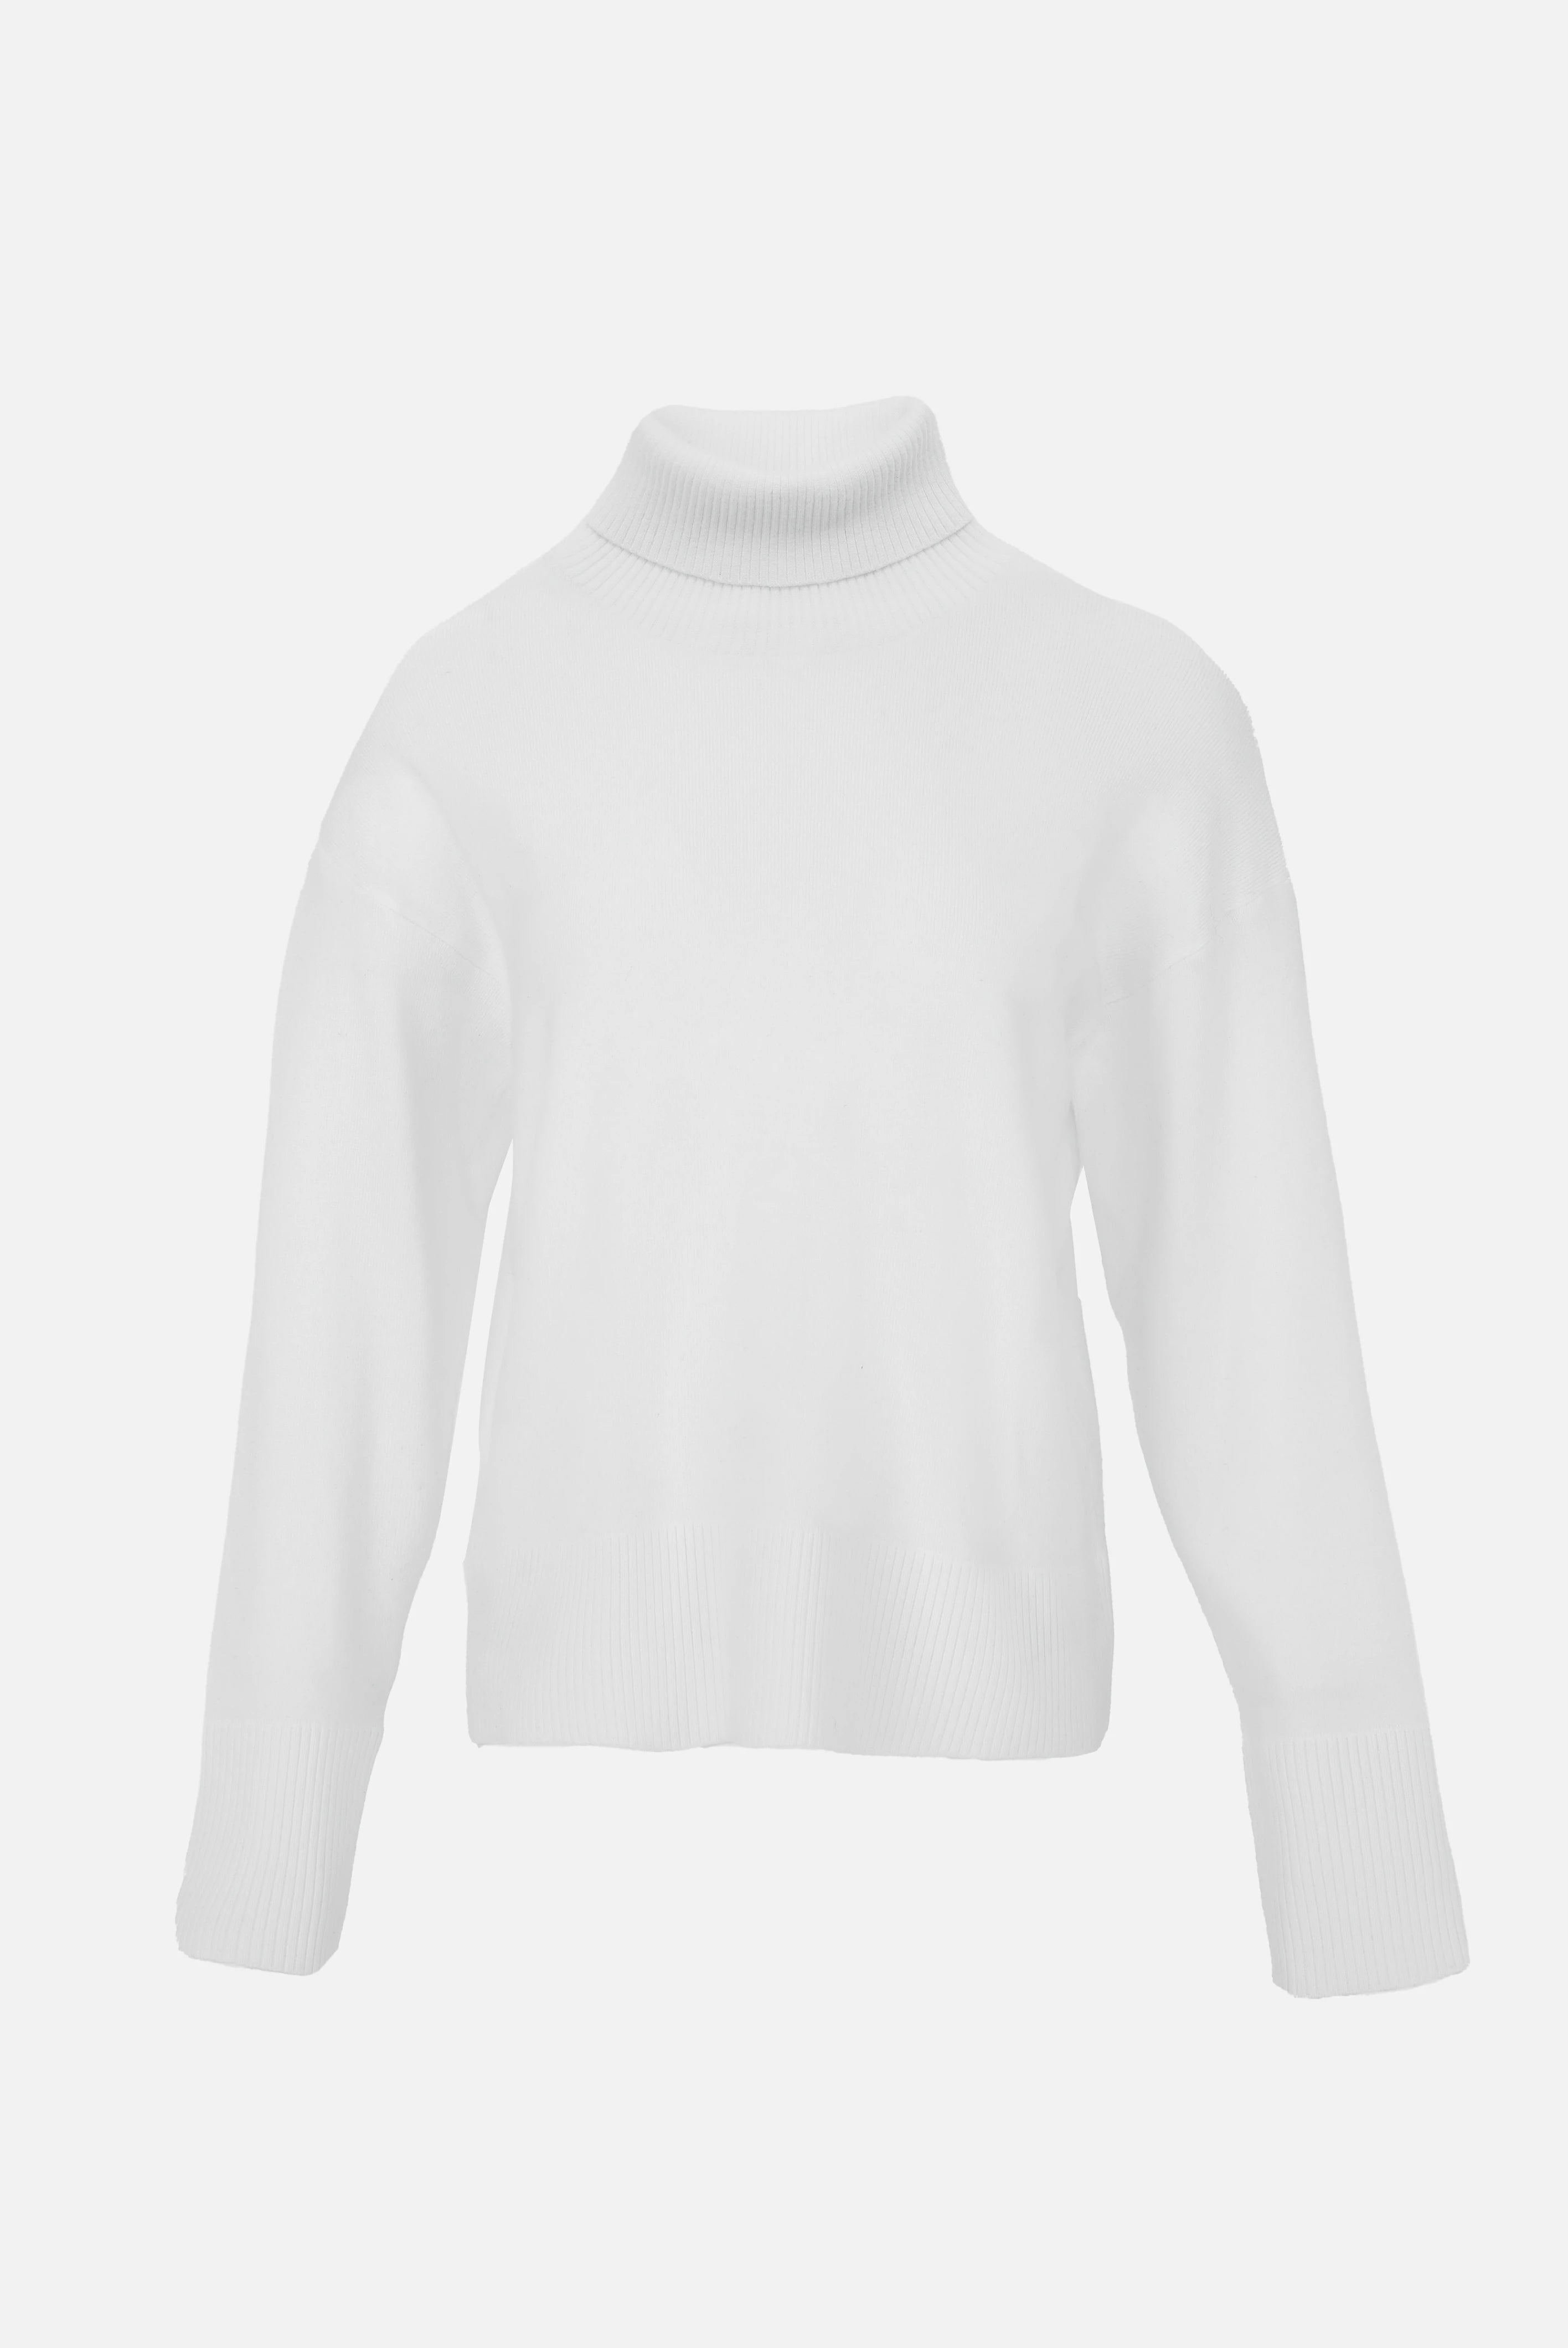 Simple Solid Color Ribbed Turtleneck Sweater